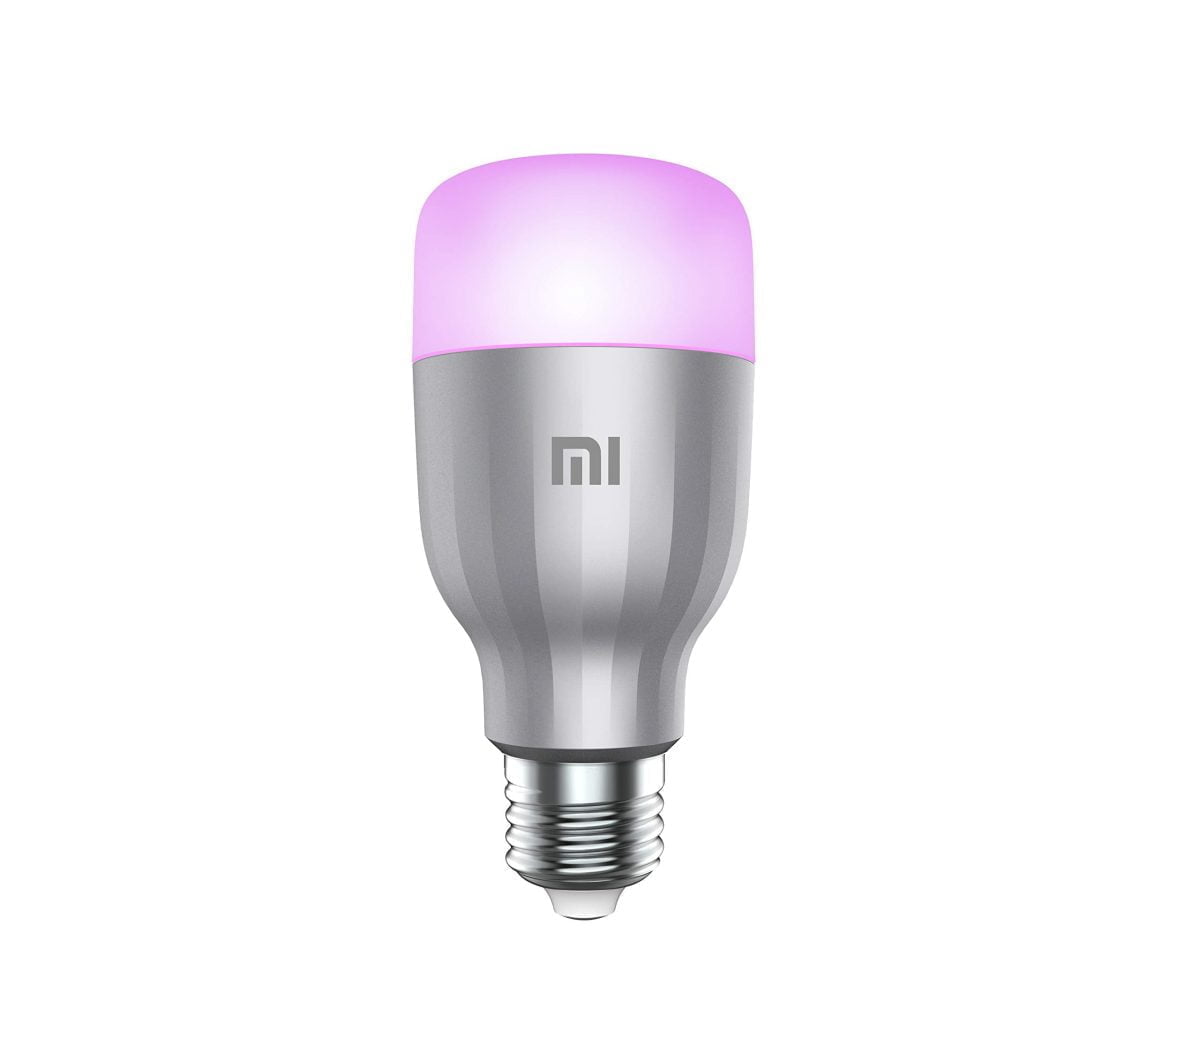 717Saokevql Xiaomi Xiaomi Mi Smart Led Bulb Essential(White And Color) Wifi Remote Control Smart Light Work With Alexa And Google Assistant, Voice Control, Wifi Connection, Adjustable Color Temperature, Scheduled On/Off, Smart App Control Xiaomi Mi Led Smart Bulb Essential Bulb (White And Color)(9W)